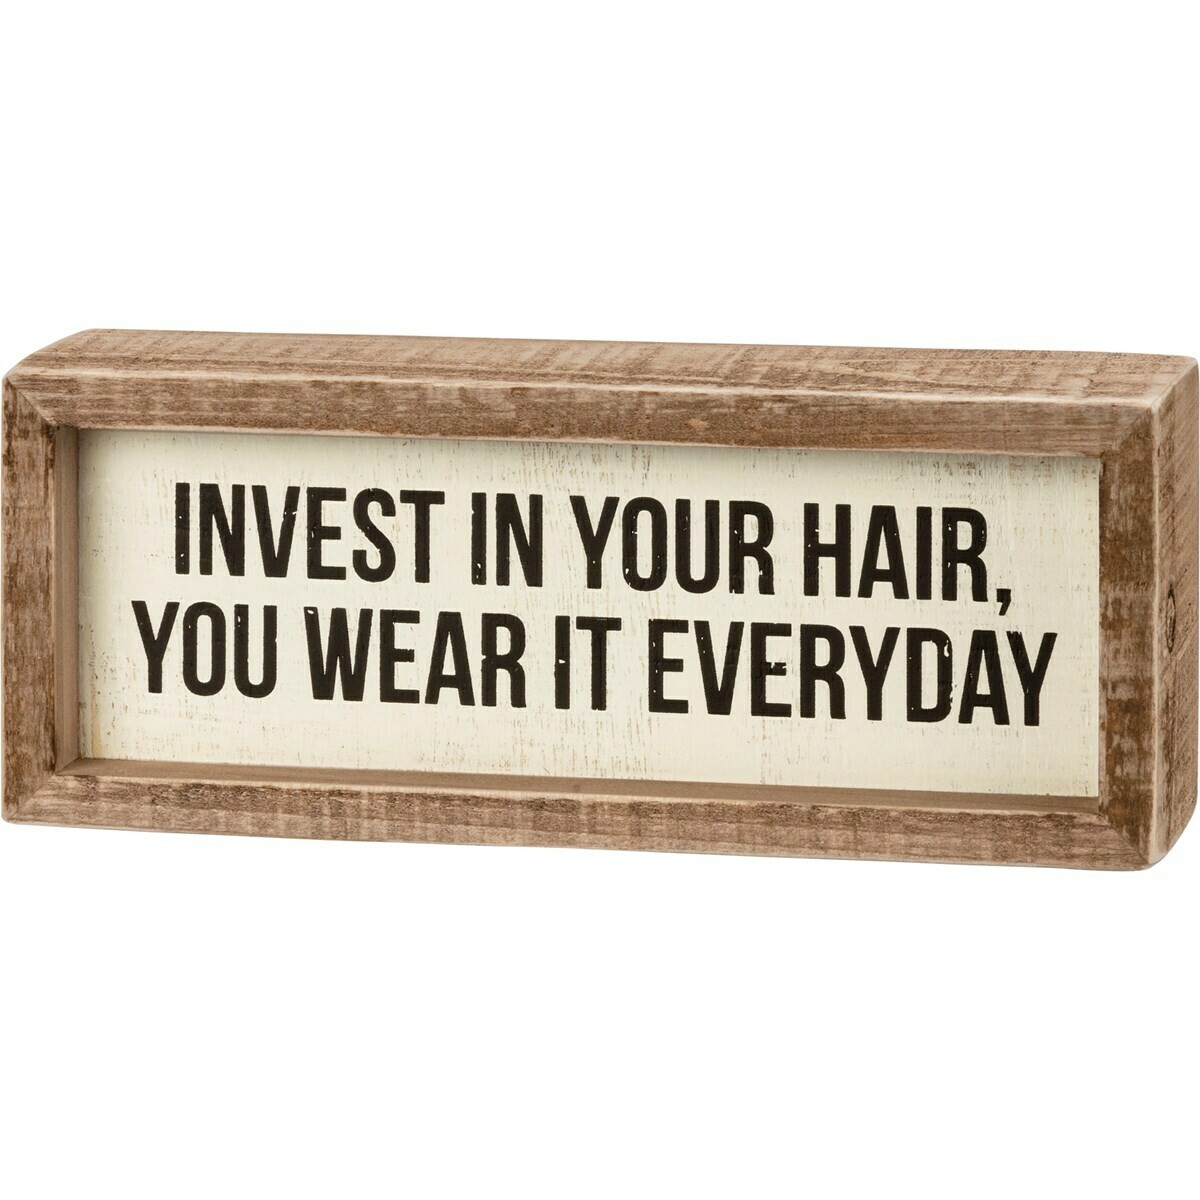 Invest in Your Hair